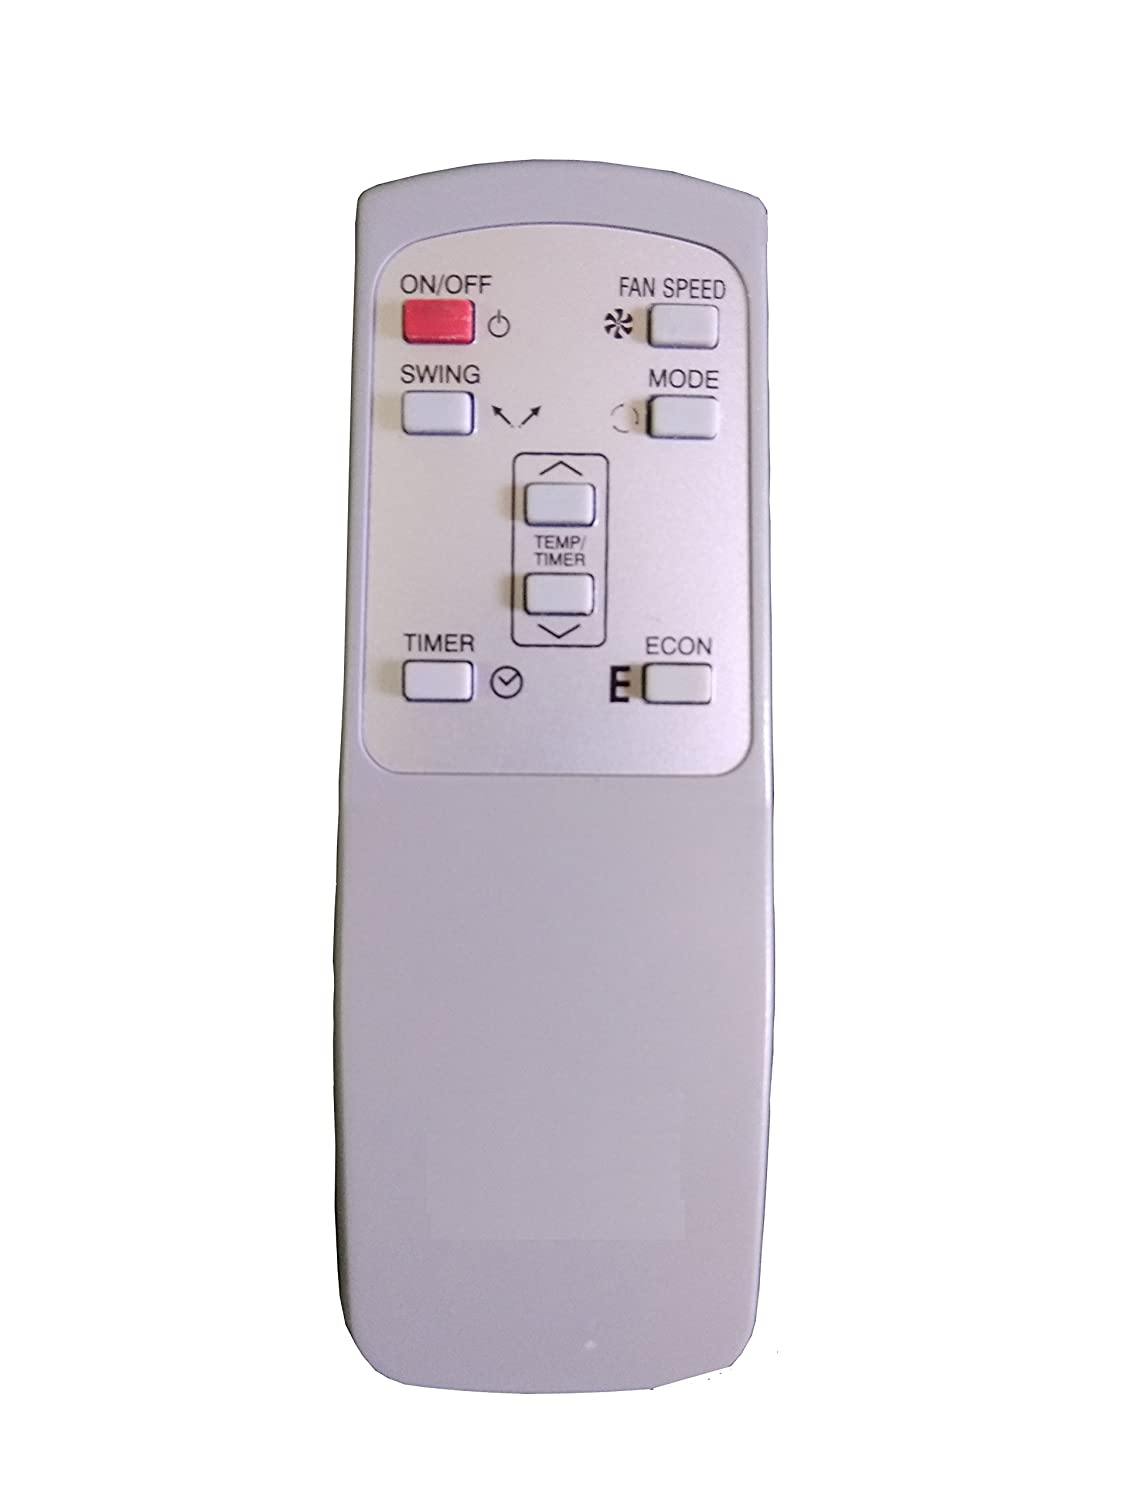 Replacement Voltas AC Remote Model 1a - China Air Conditioner Remotes :: Cheapest AC Remote Solutions